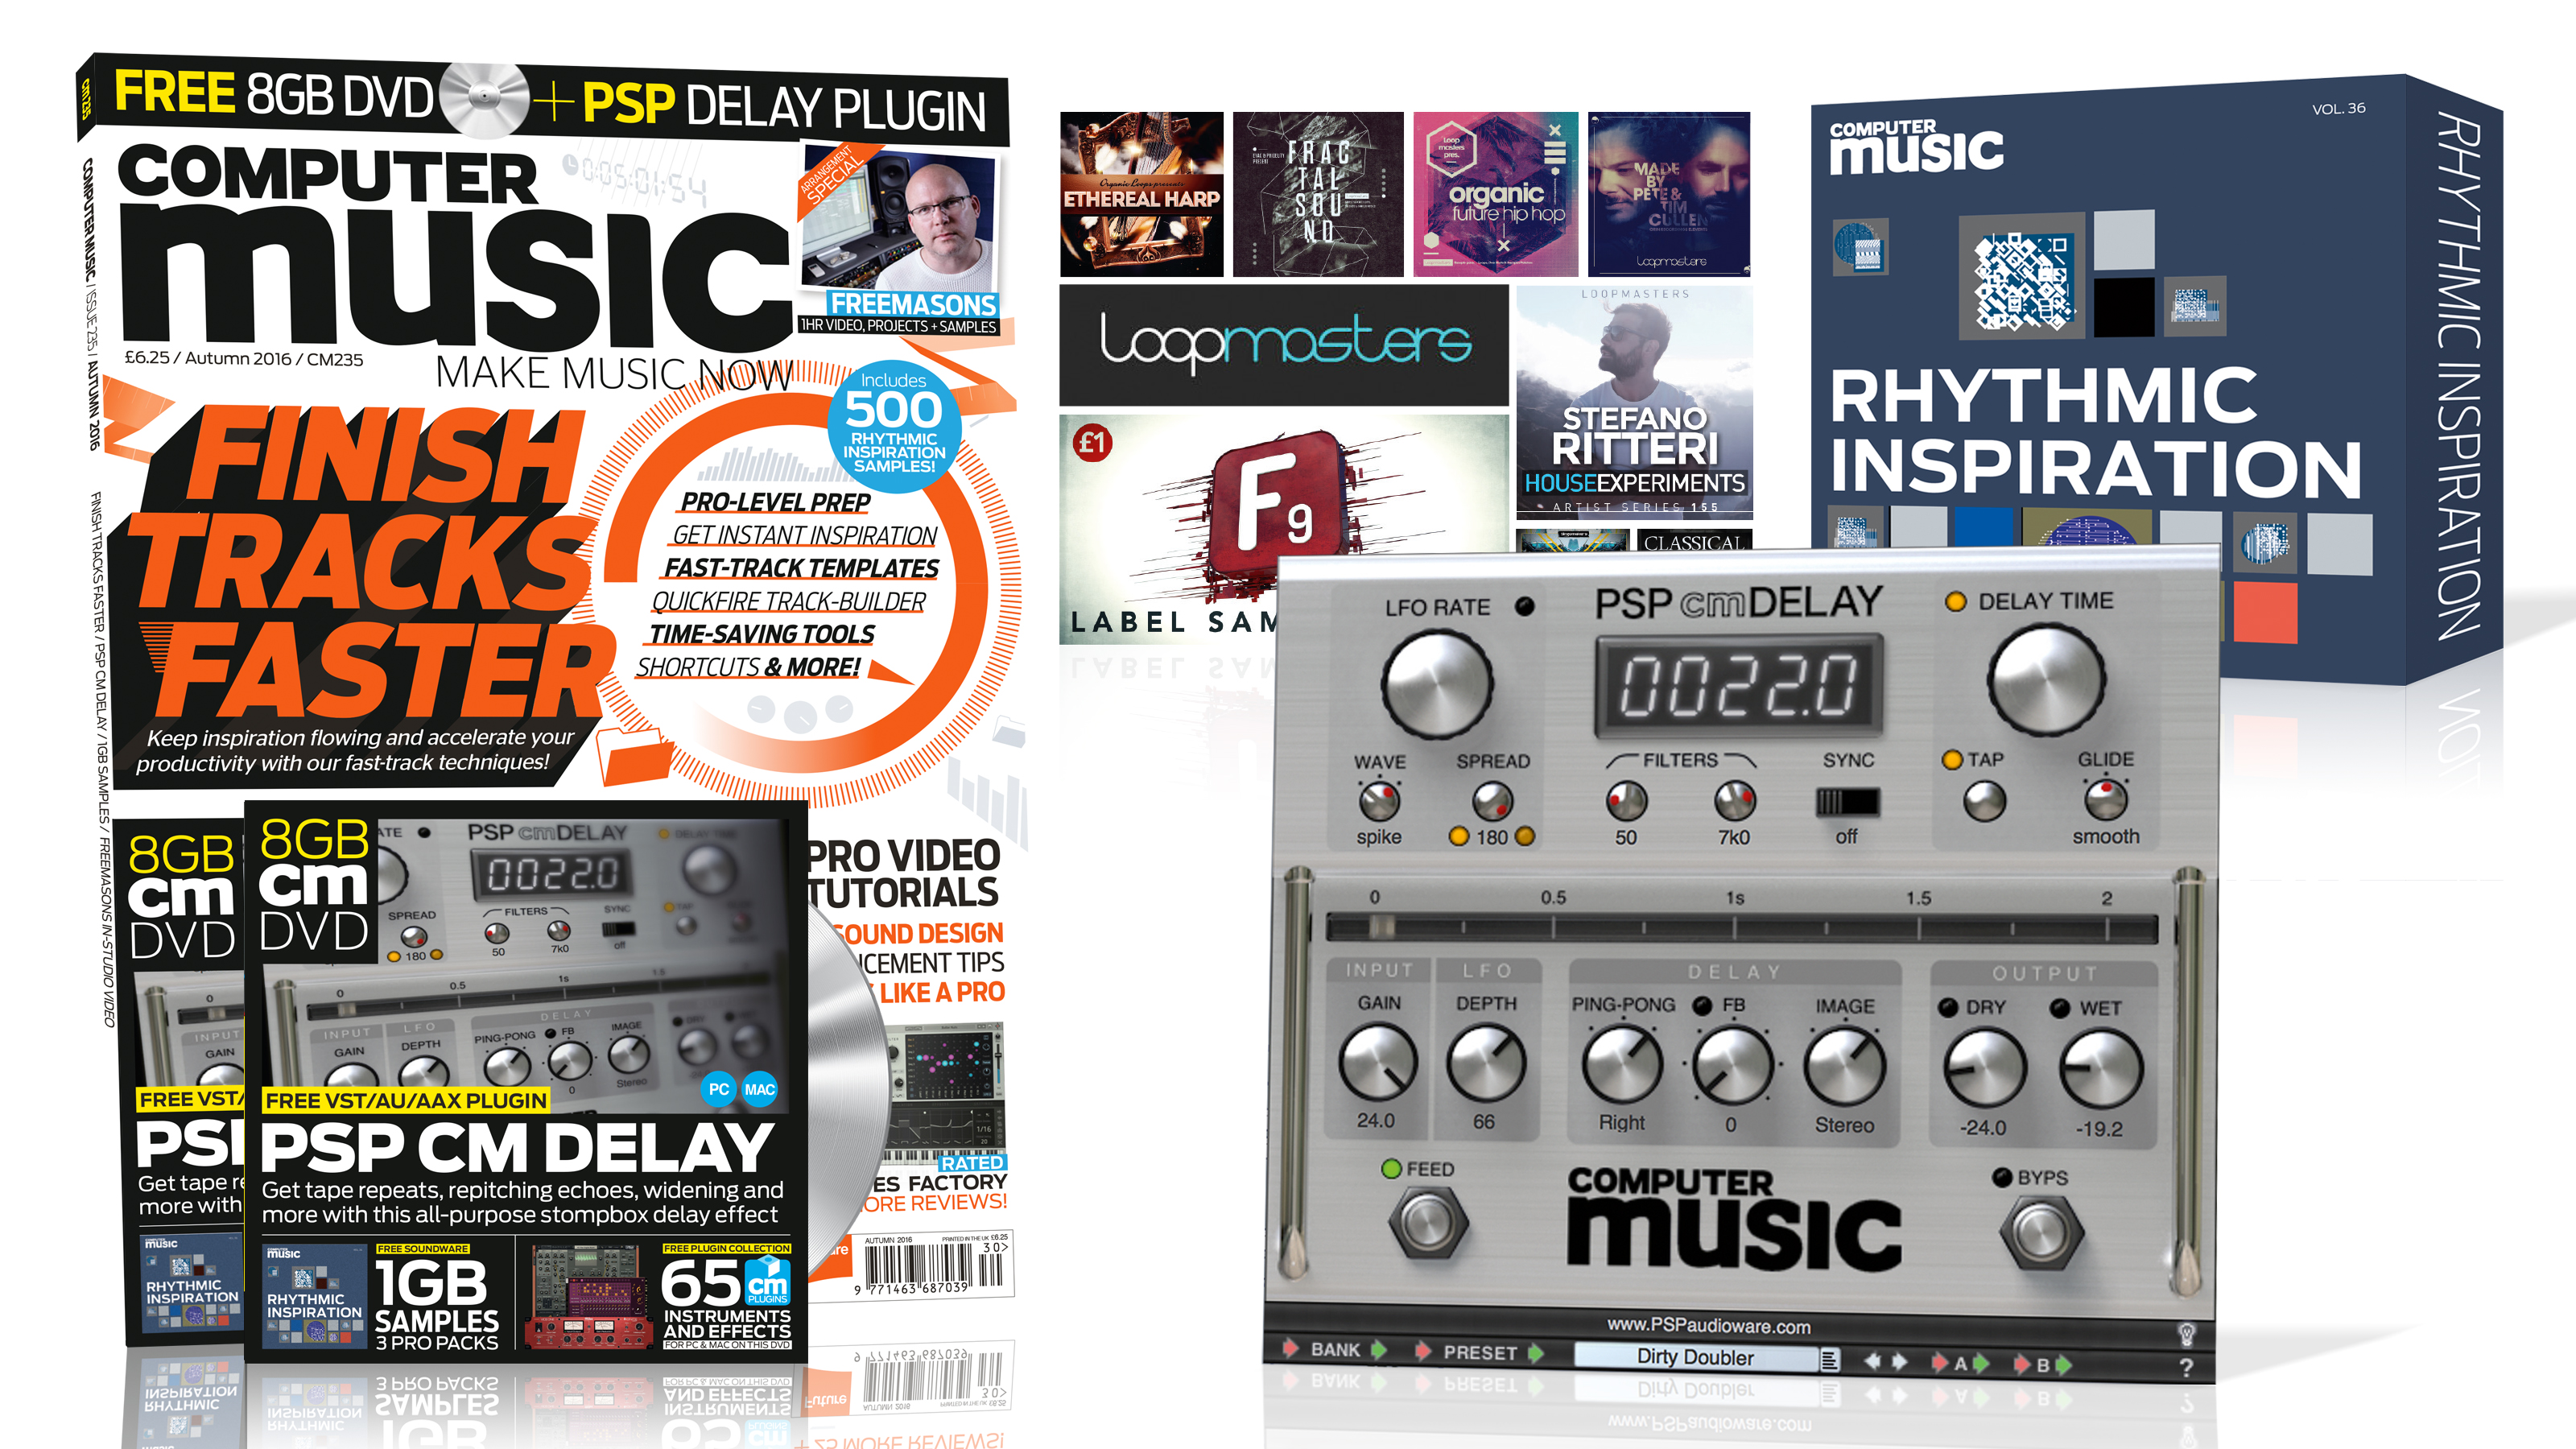 FINISH TRACKS FASTER – Computer Music issue 235 |